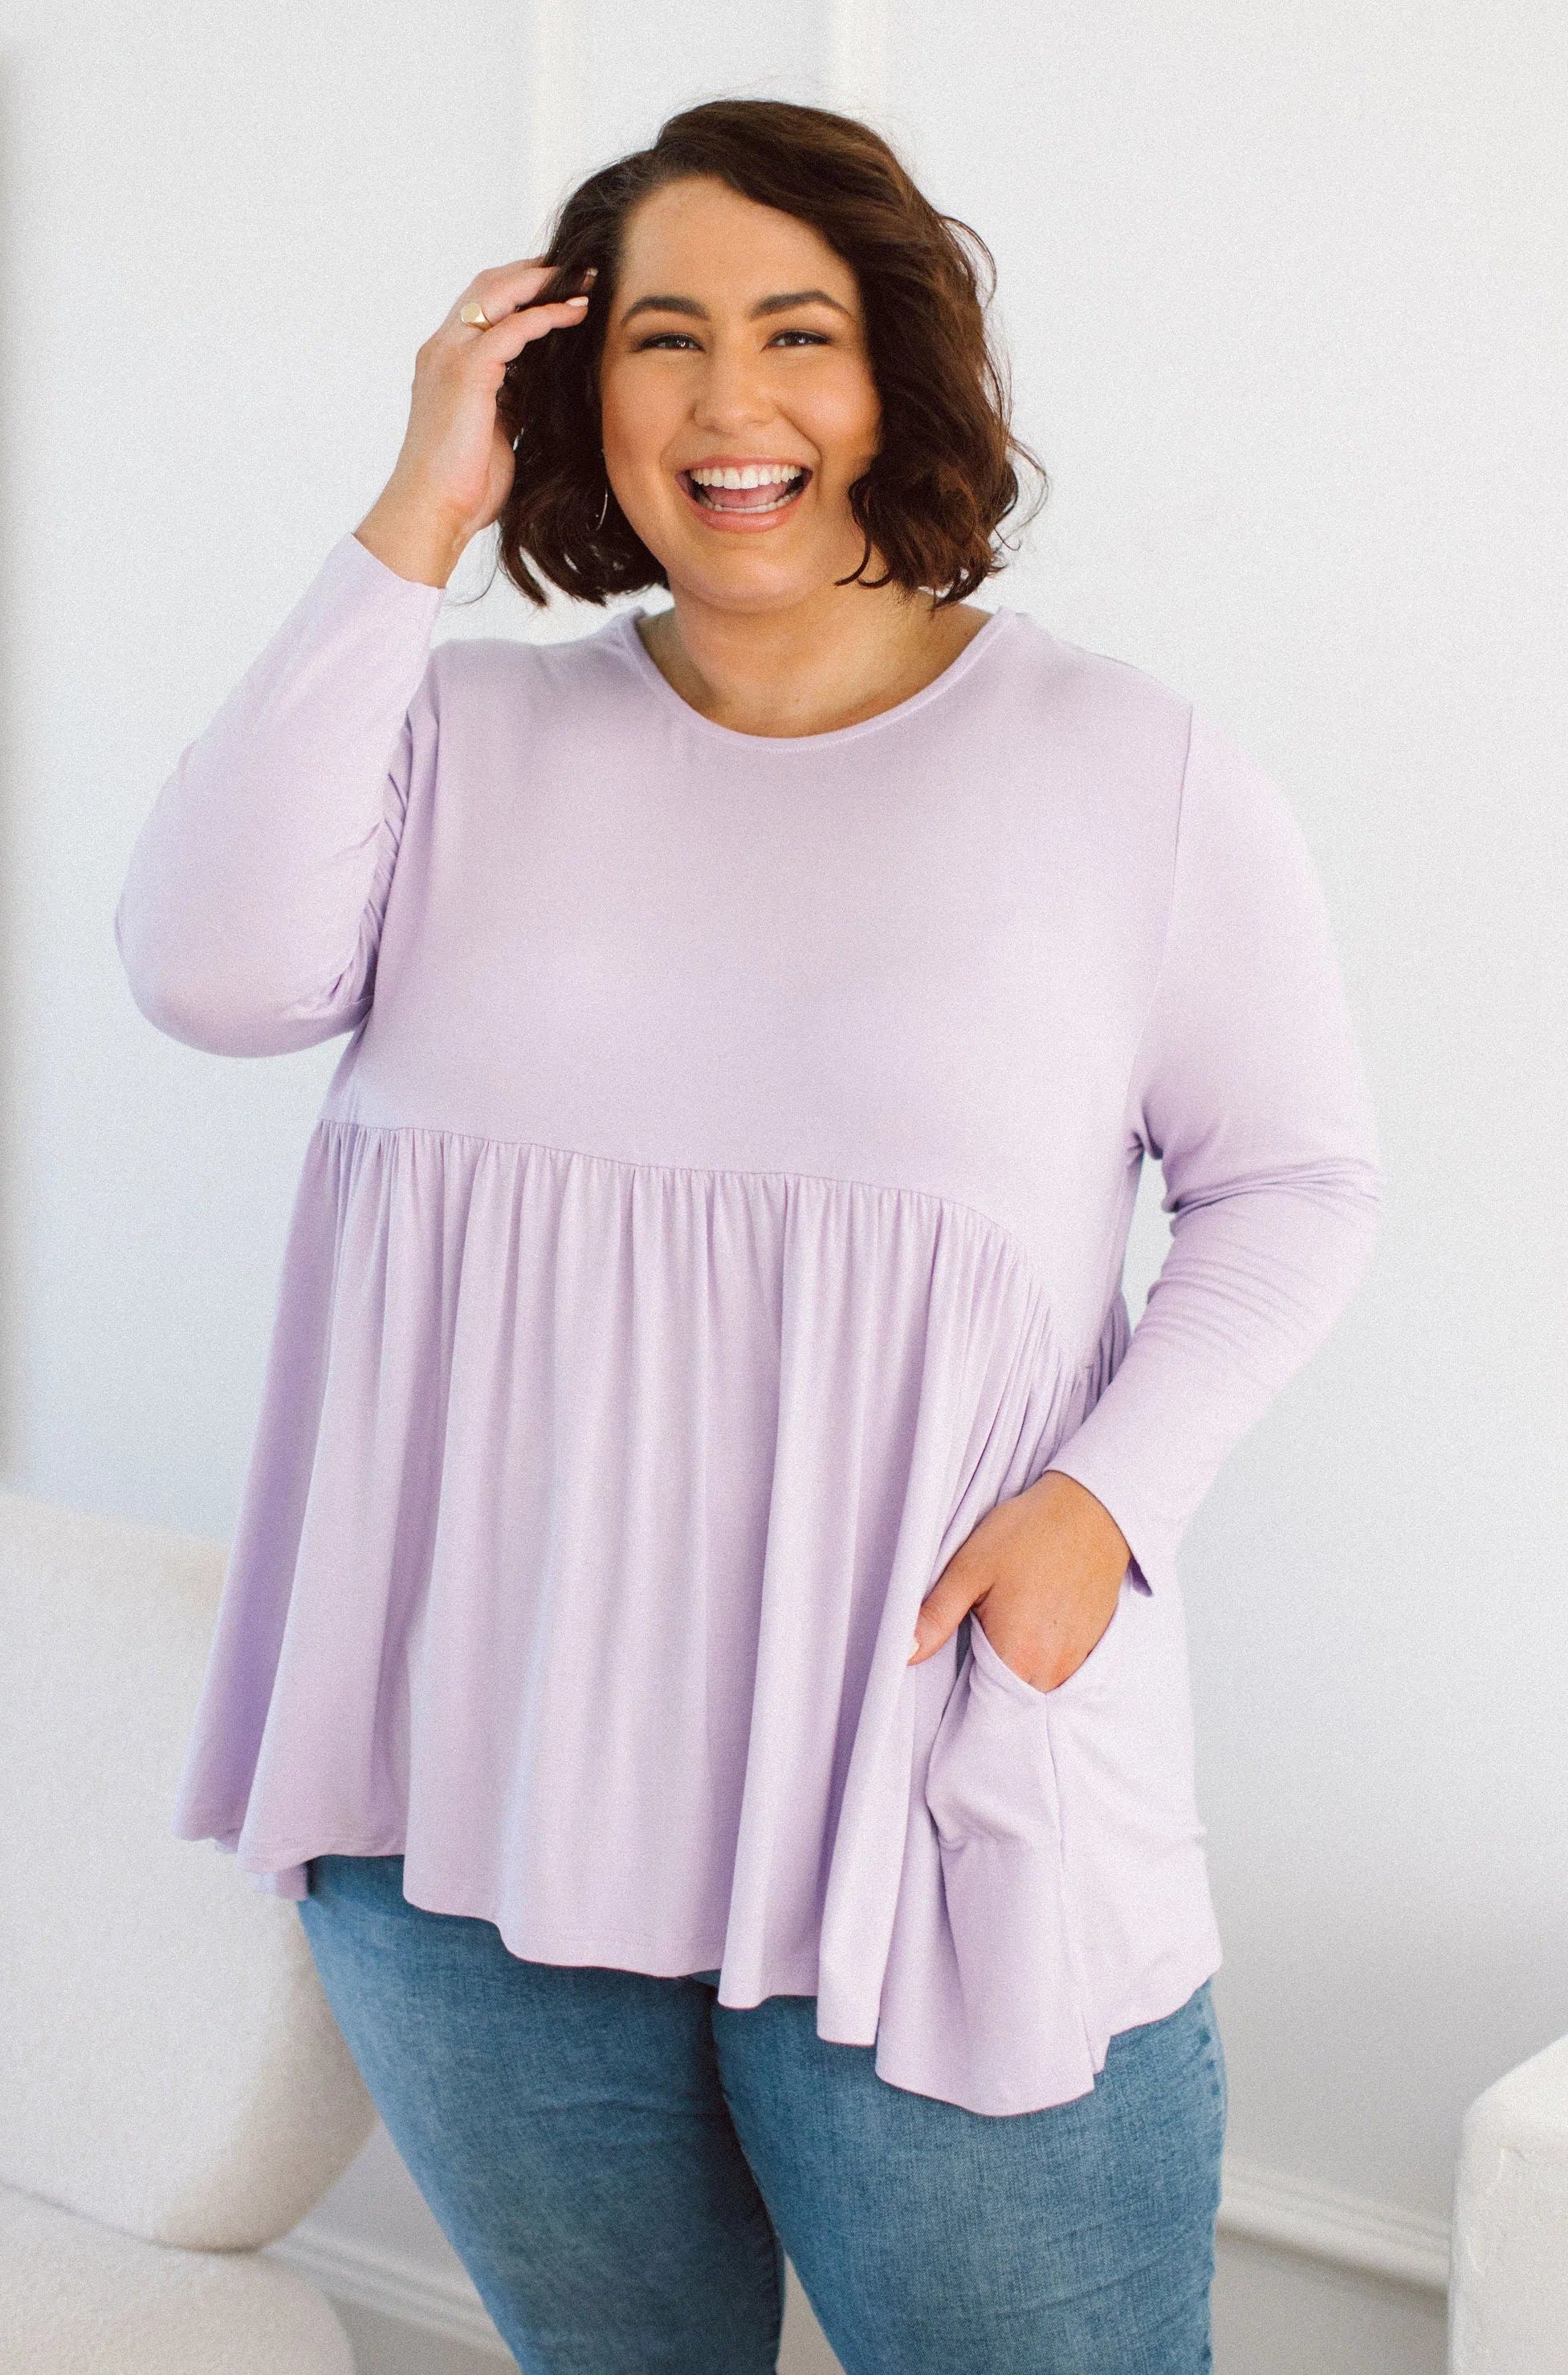 Plus Size clothing,  women modeling a Plus Size Long Sleeve Shirt - Embrace Lilac Charm with Lucy Long Sleeve Top